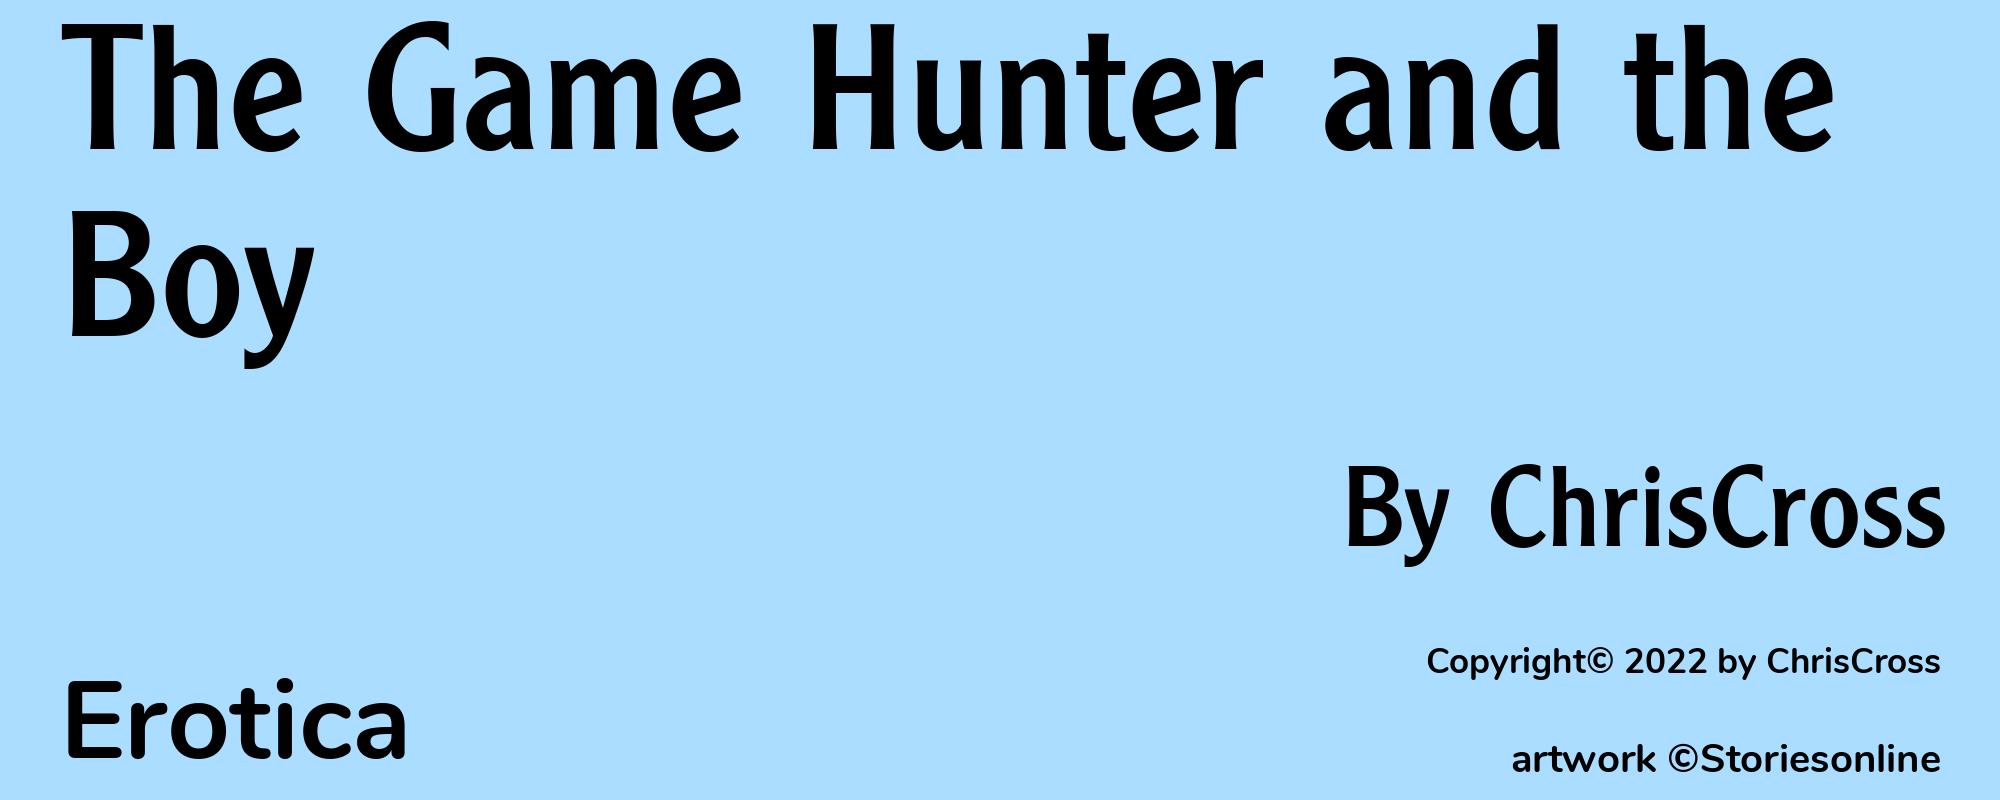 The Game Hunter and the Boy - Cover